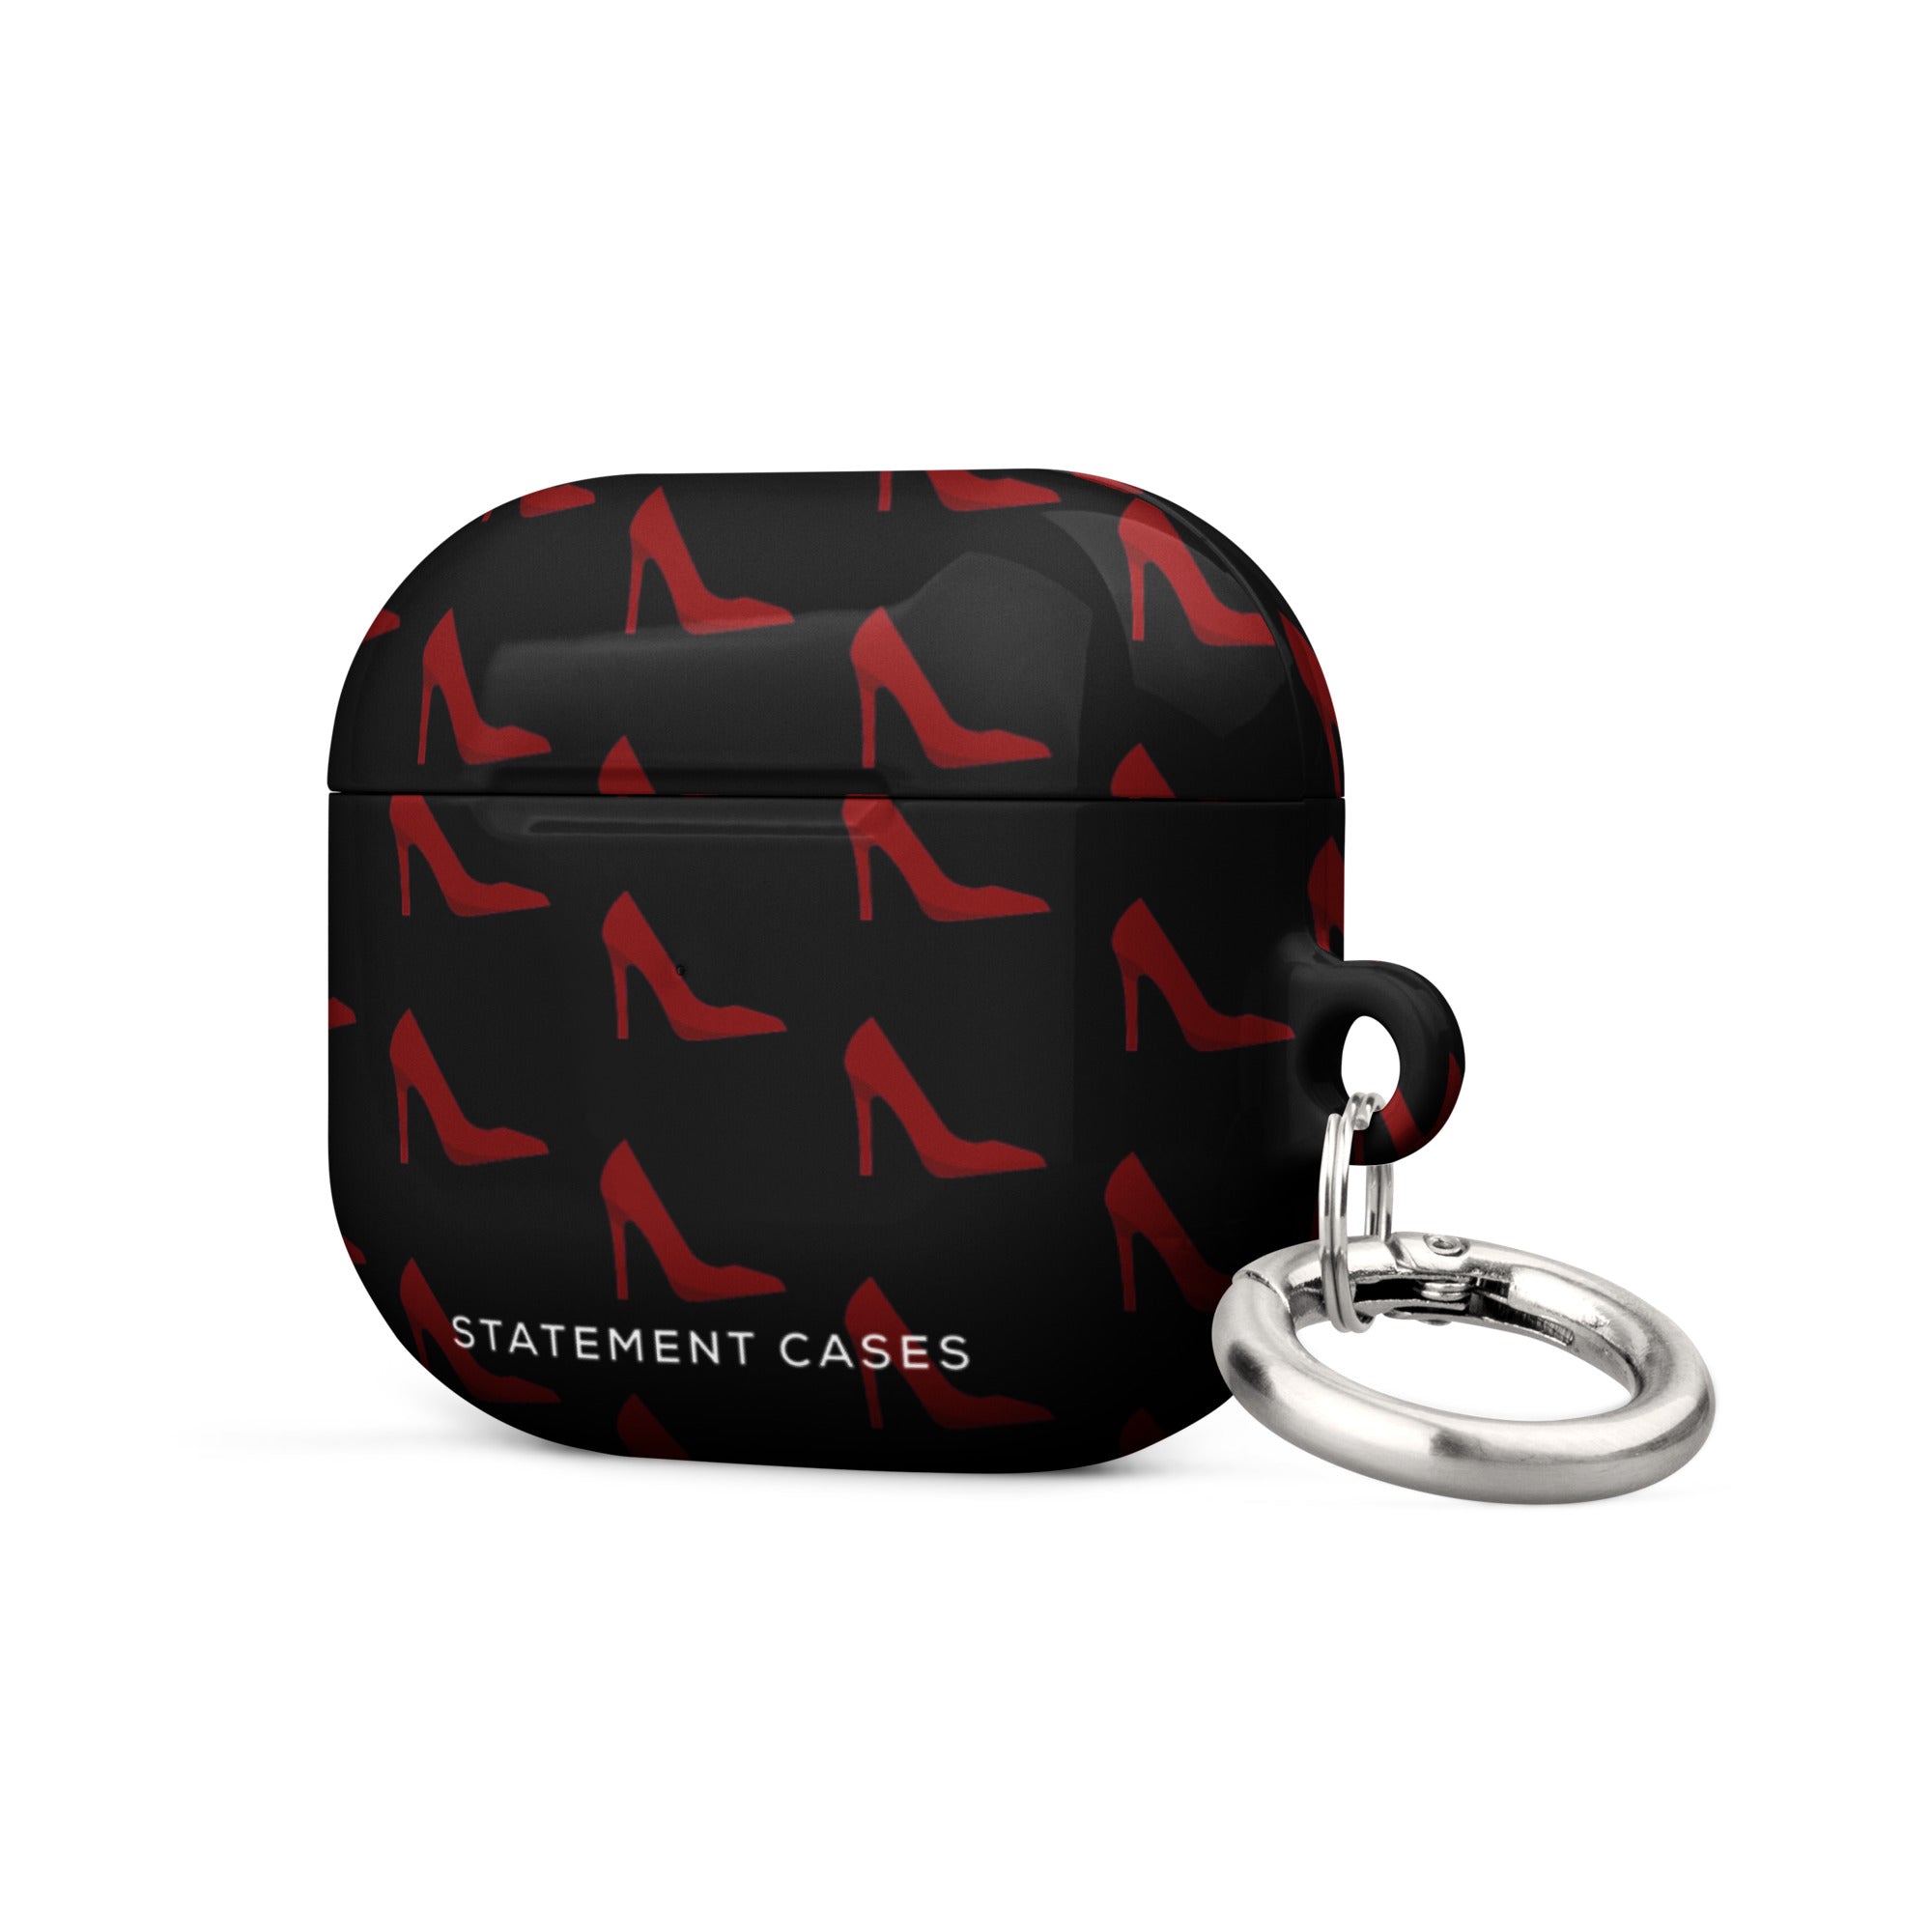 A black Saucy Stillettos for AirPods Gen 3 adorned with a pattern of red high-heeled shoes. It is branded with "Statement Cases" in white text on the front. The impact-absorbing case has a metal carabiner attached to the side for convenience.